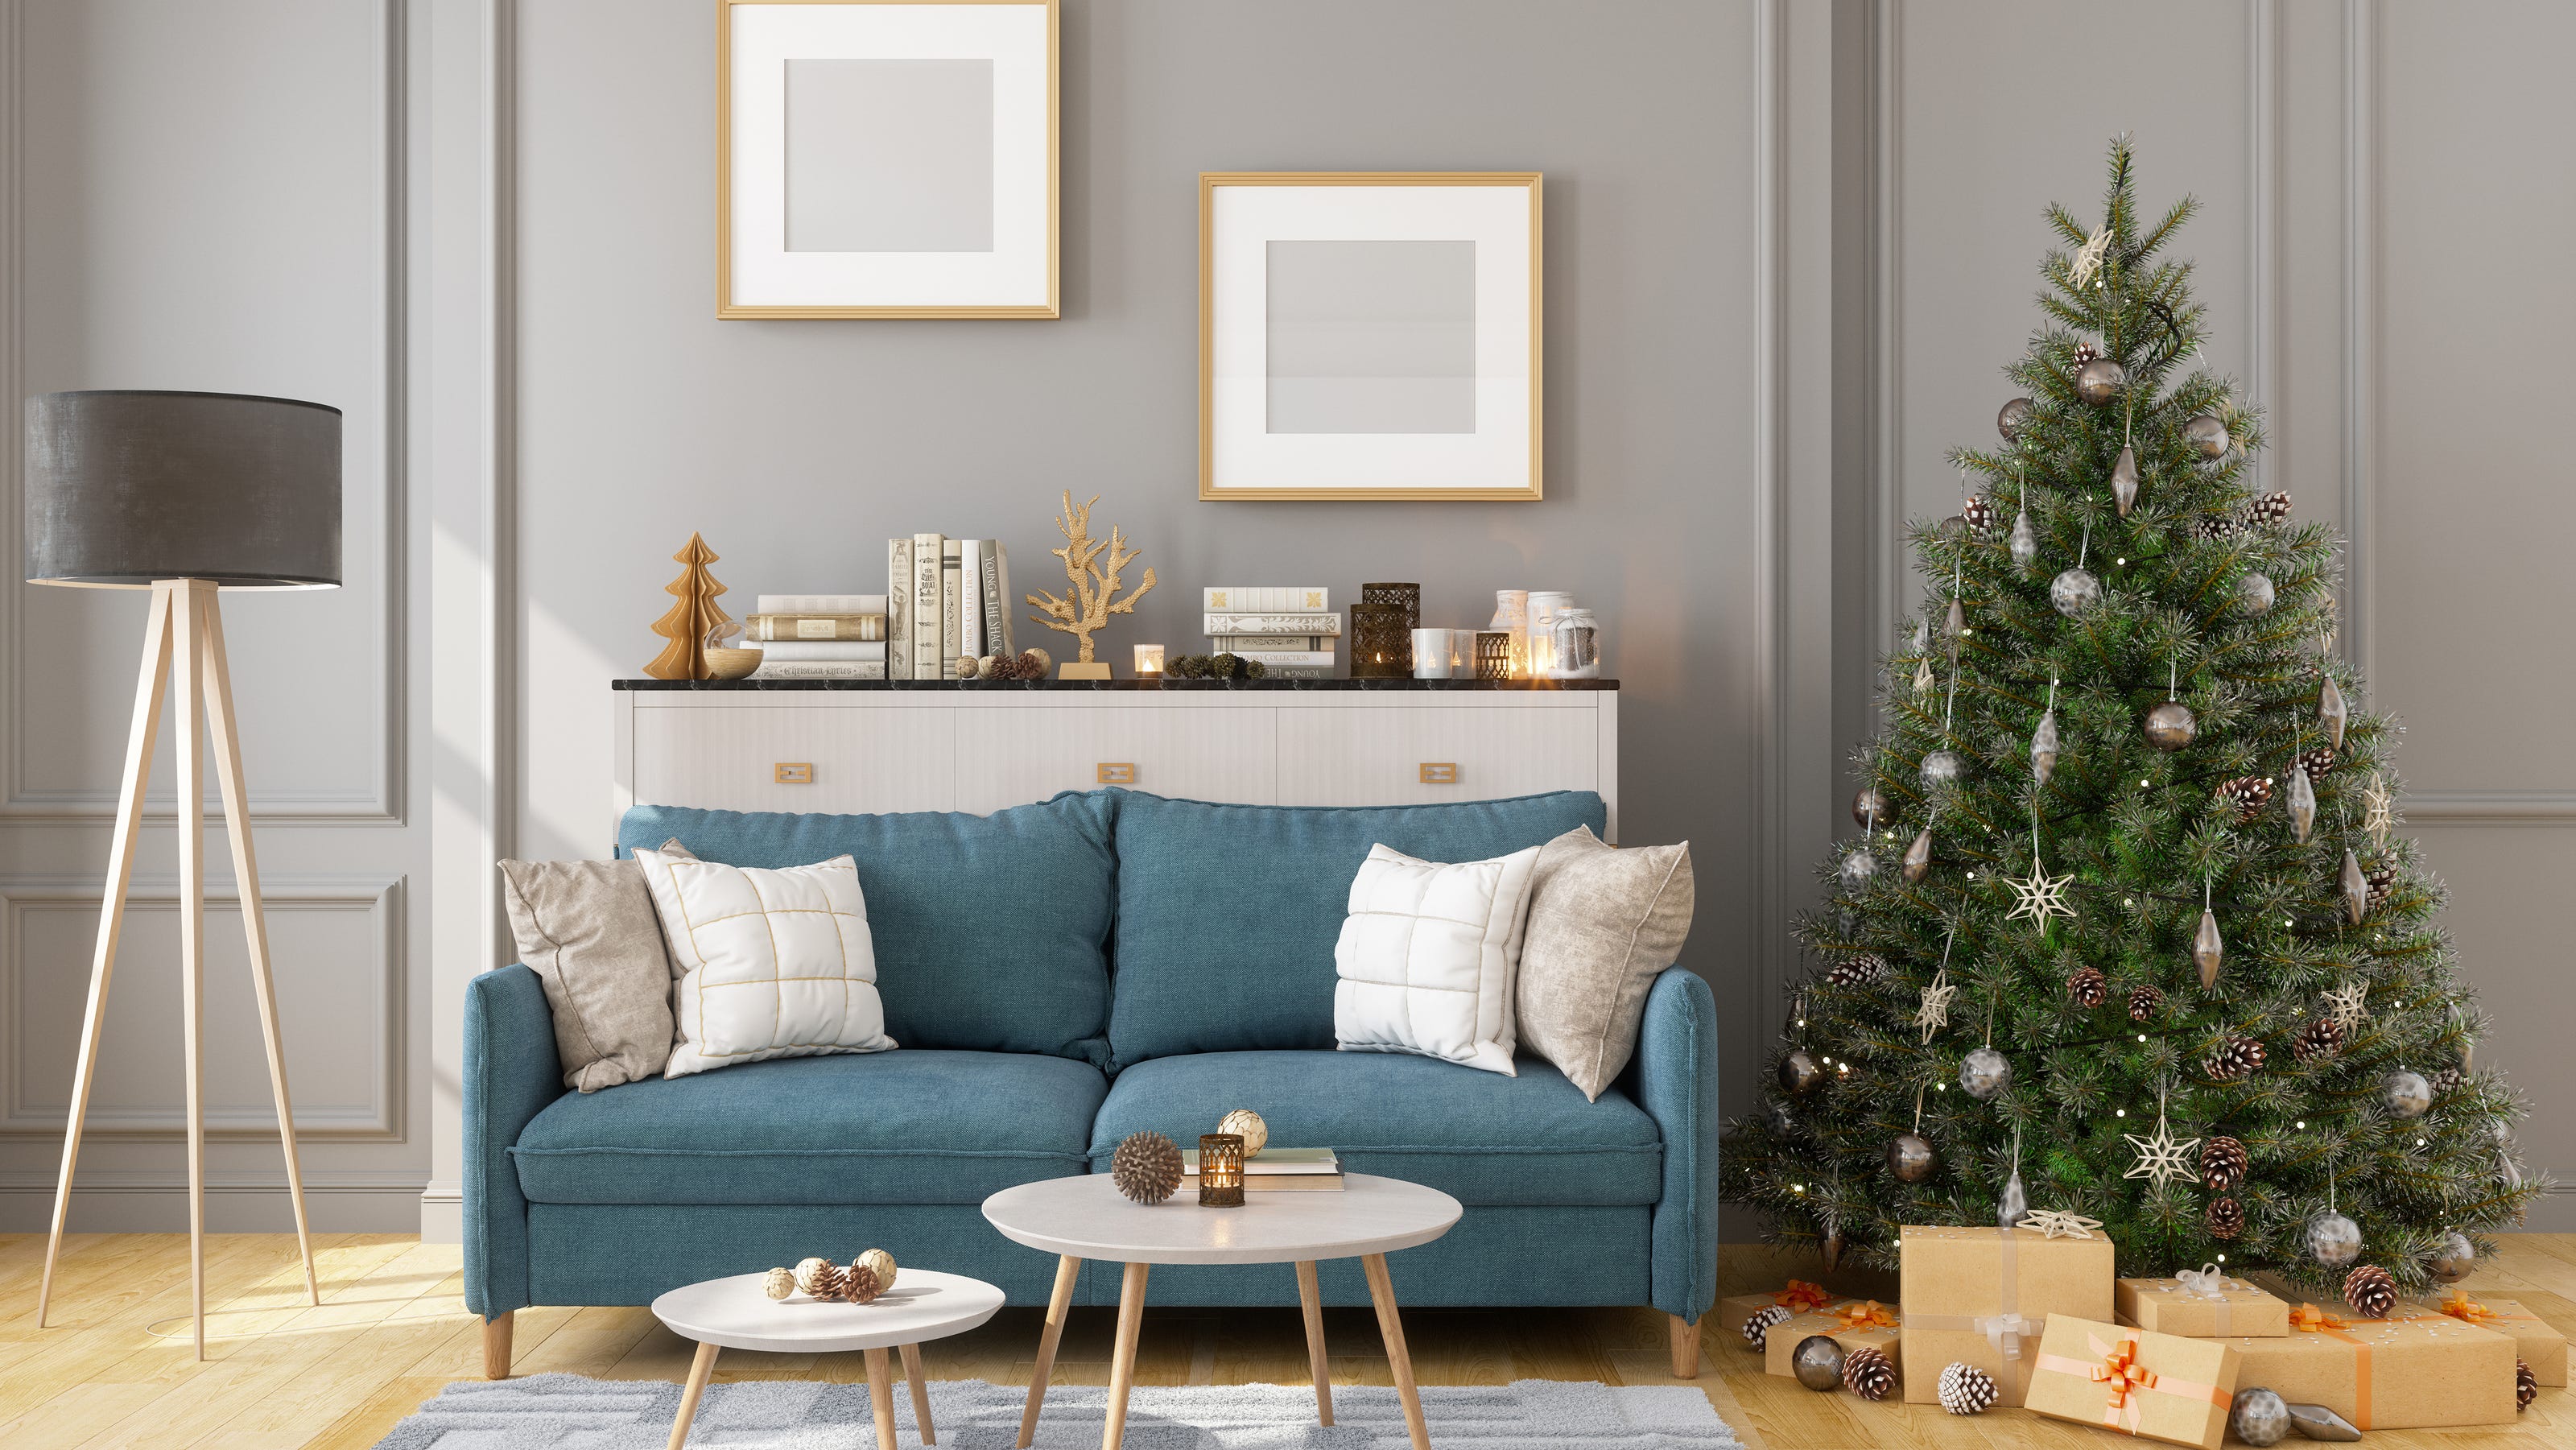 Wayfair furniture sale: Shop the store's end-of-year clearance